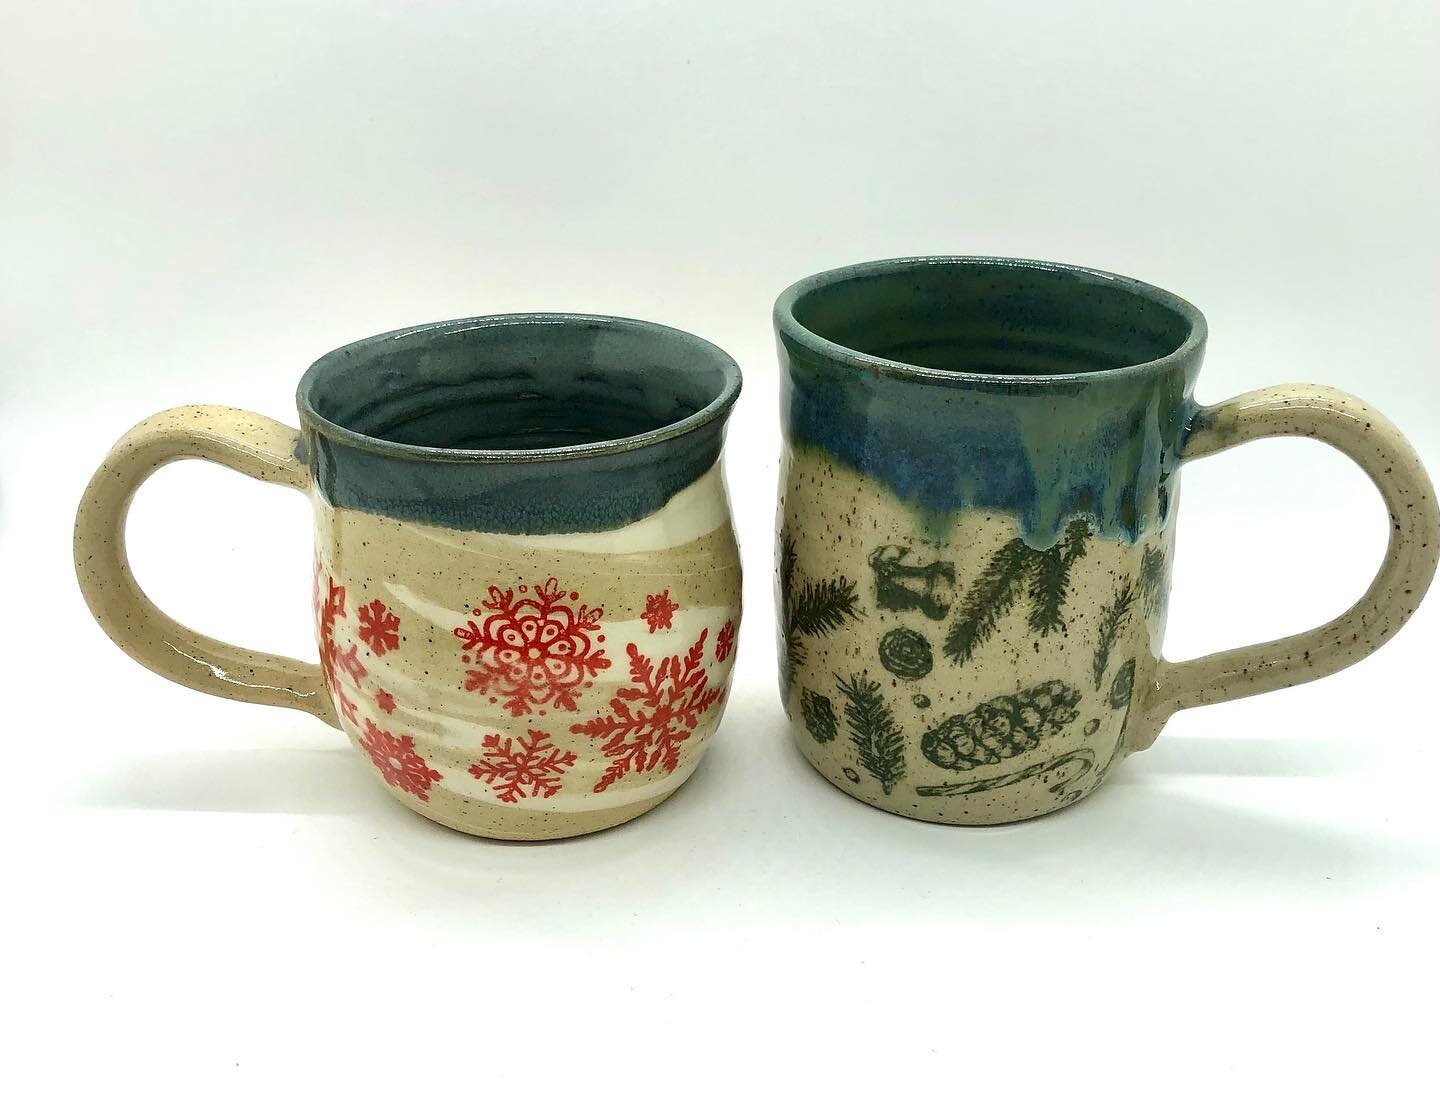 Meet the Makers - Wholly Handmade December 10/11

@shelleysartistryco 

Hi I&rsquo;m Shelley and I have been doing pottery for 15 years. It&rsquo;s been inspiring making pieces requested by customers and making their visions come to life. I enjoy mak